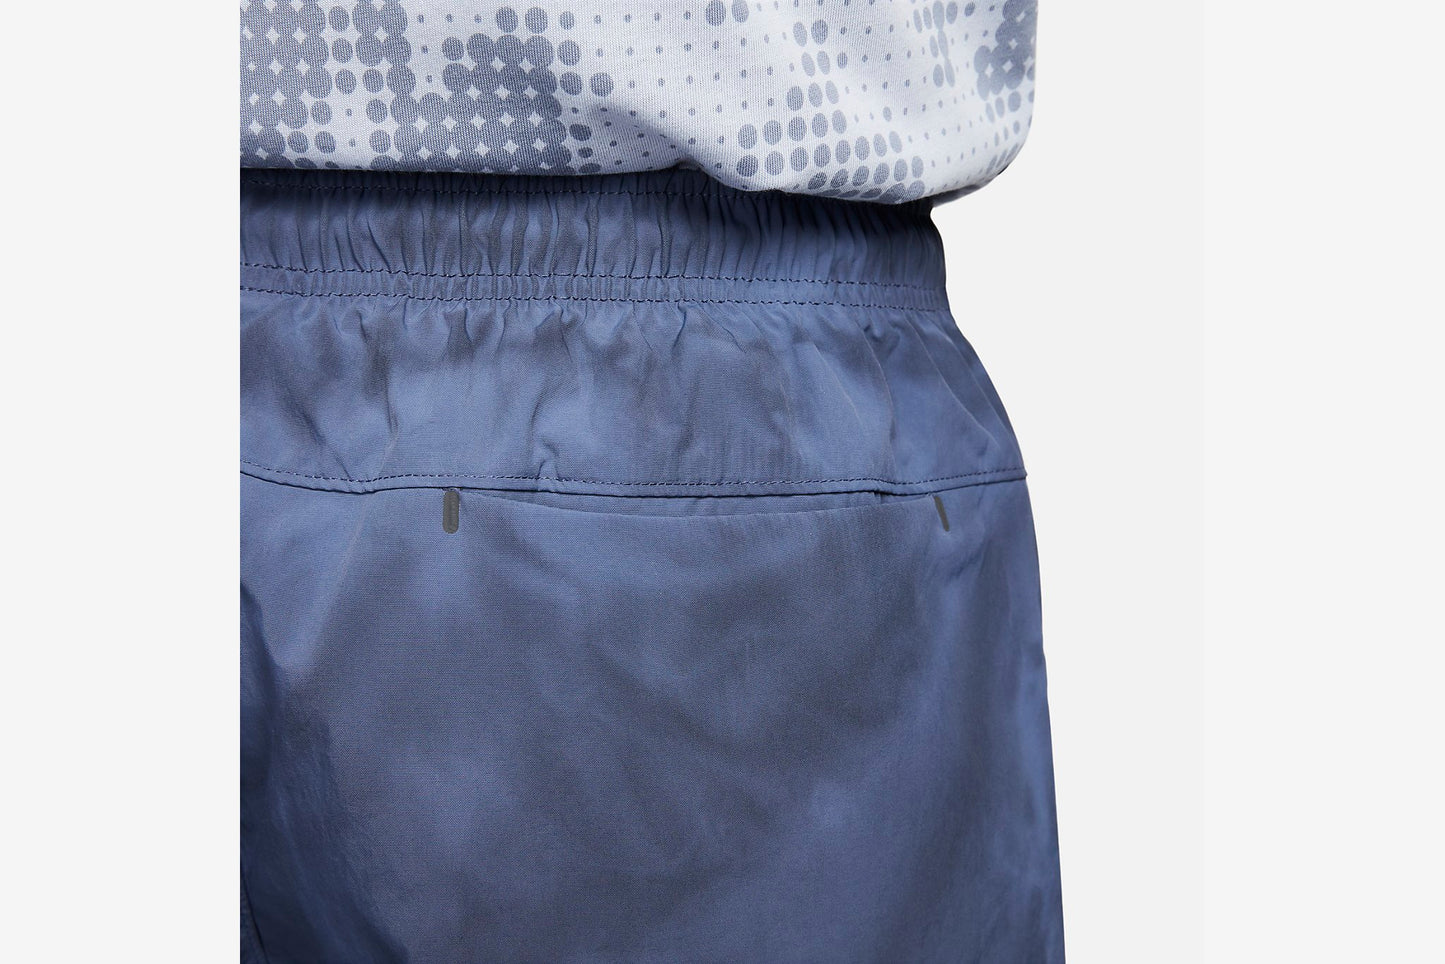 Nike "Sportswear Tech Pack Woven Shorts" M - Diffused Blue/Gridiron